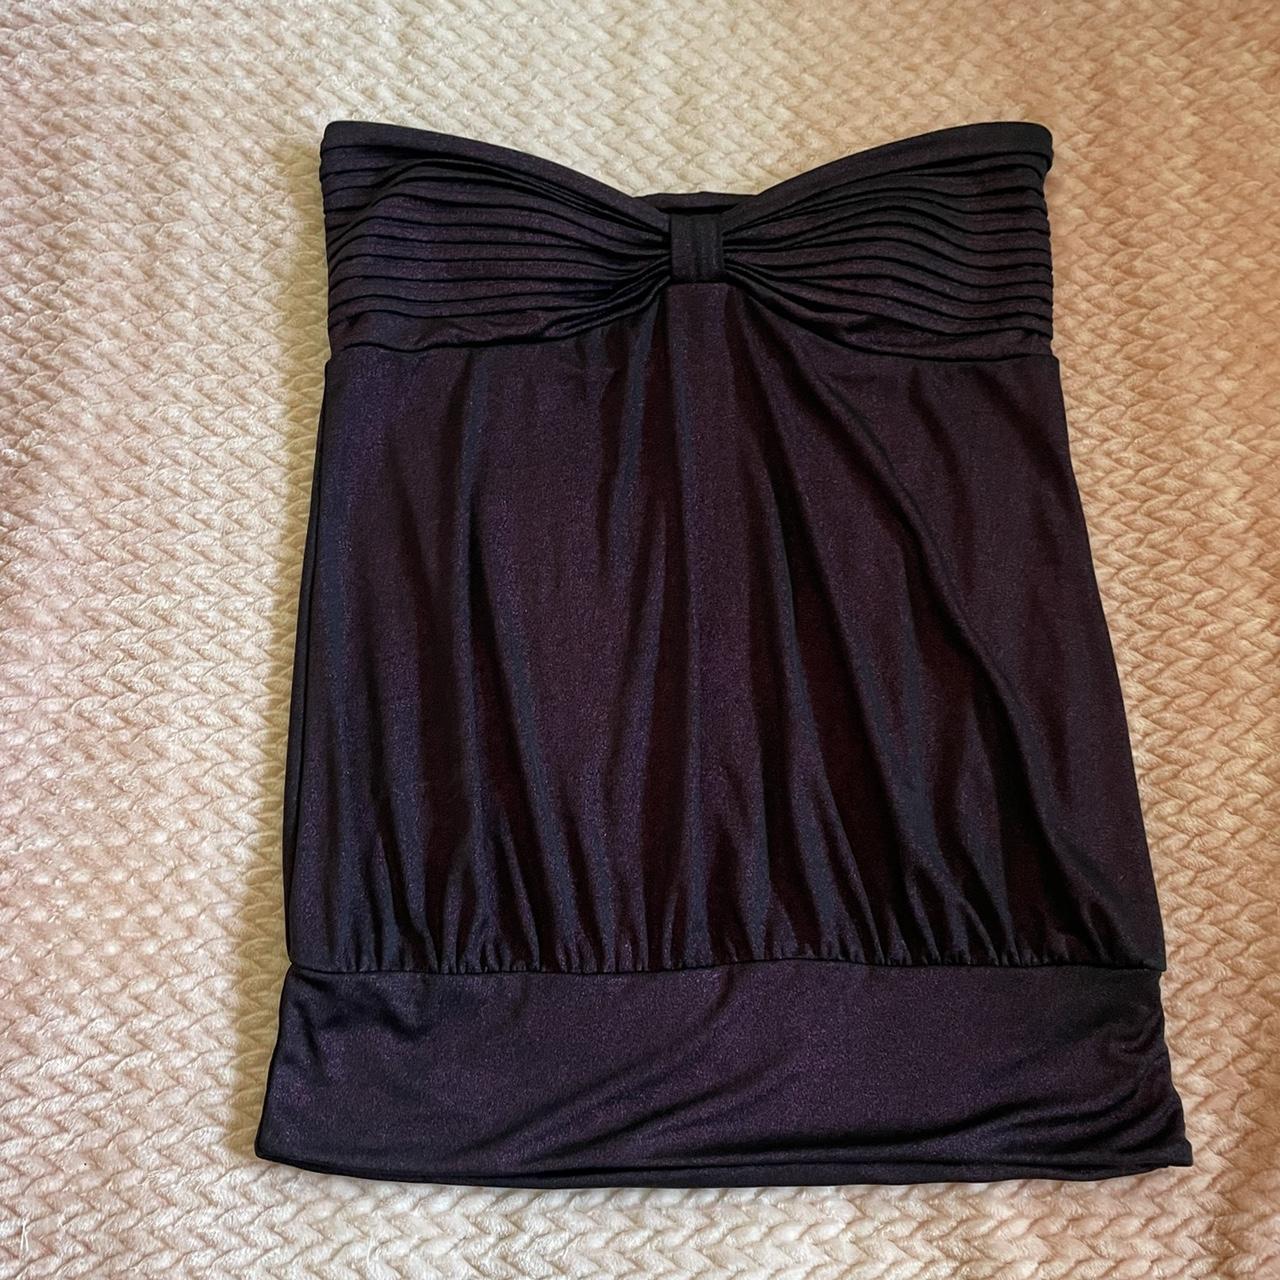 Product Image 1 - Early 2000s Dark red strapless